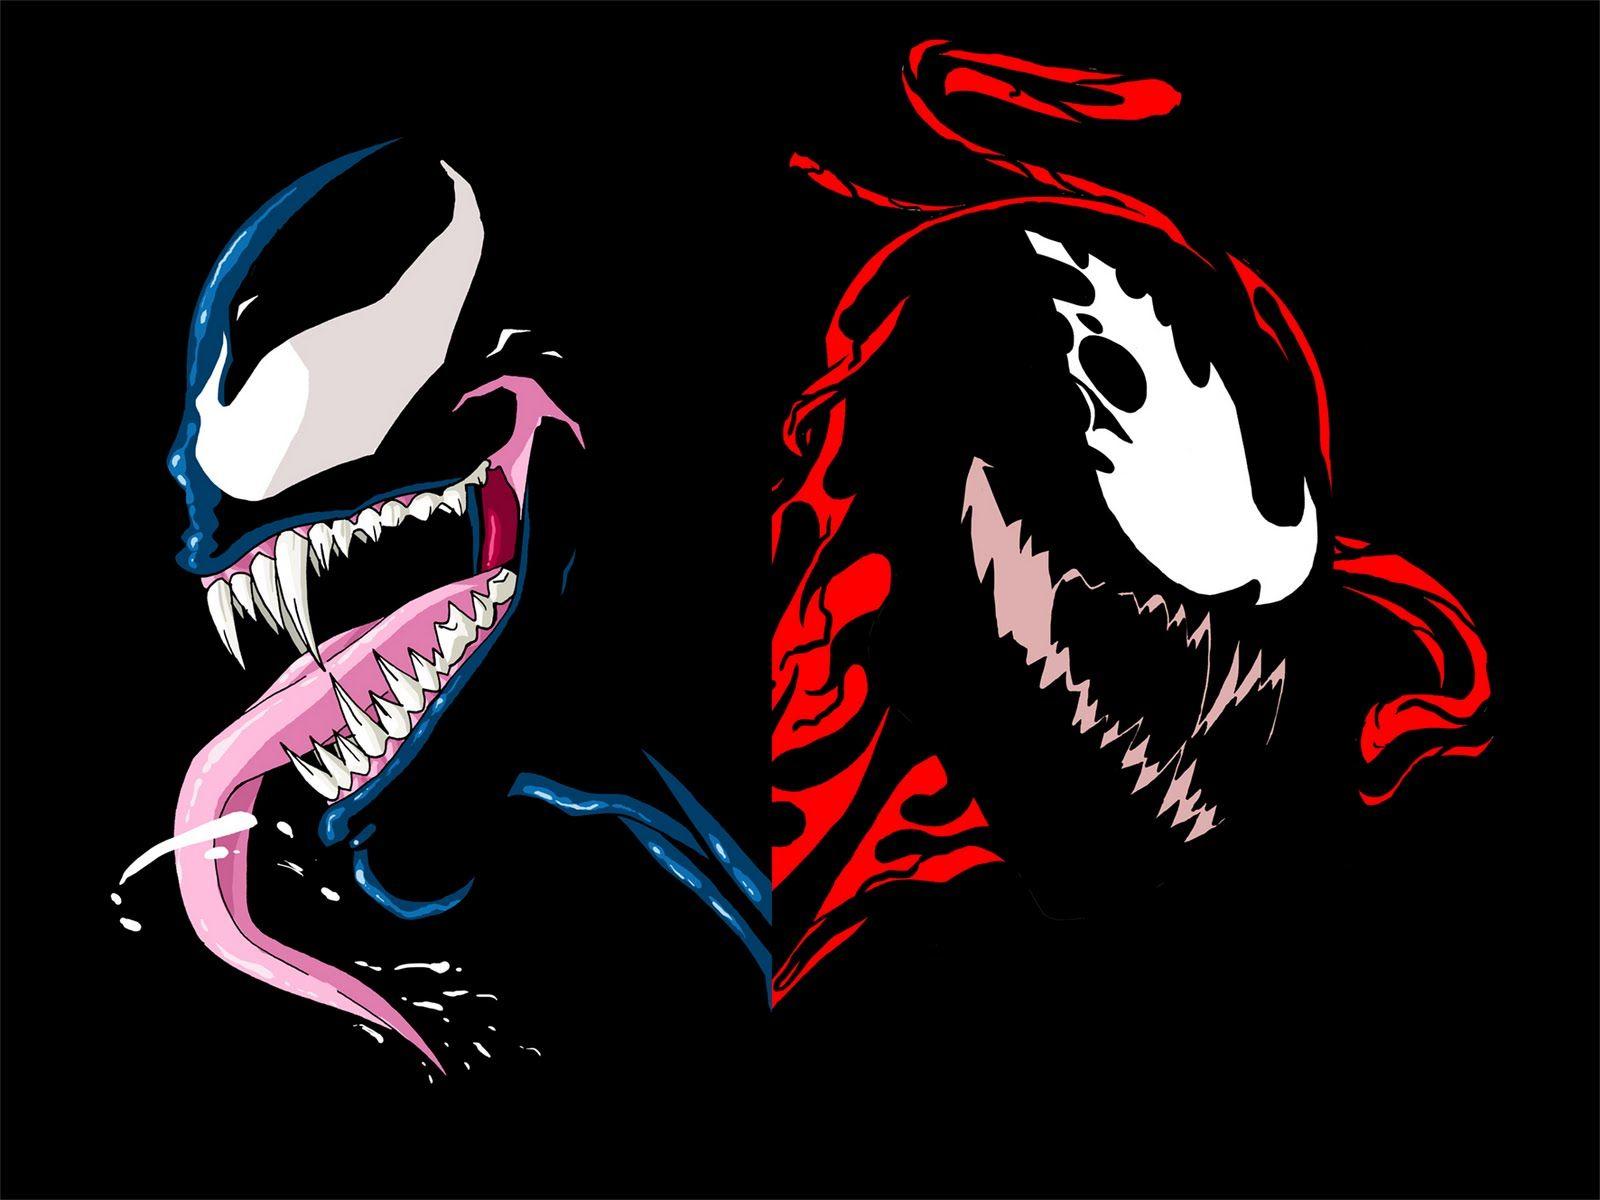 Venom Let There Be Carnage 4K Phone iPhone Wallpaper 151c